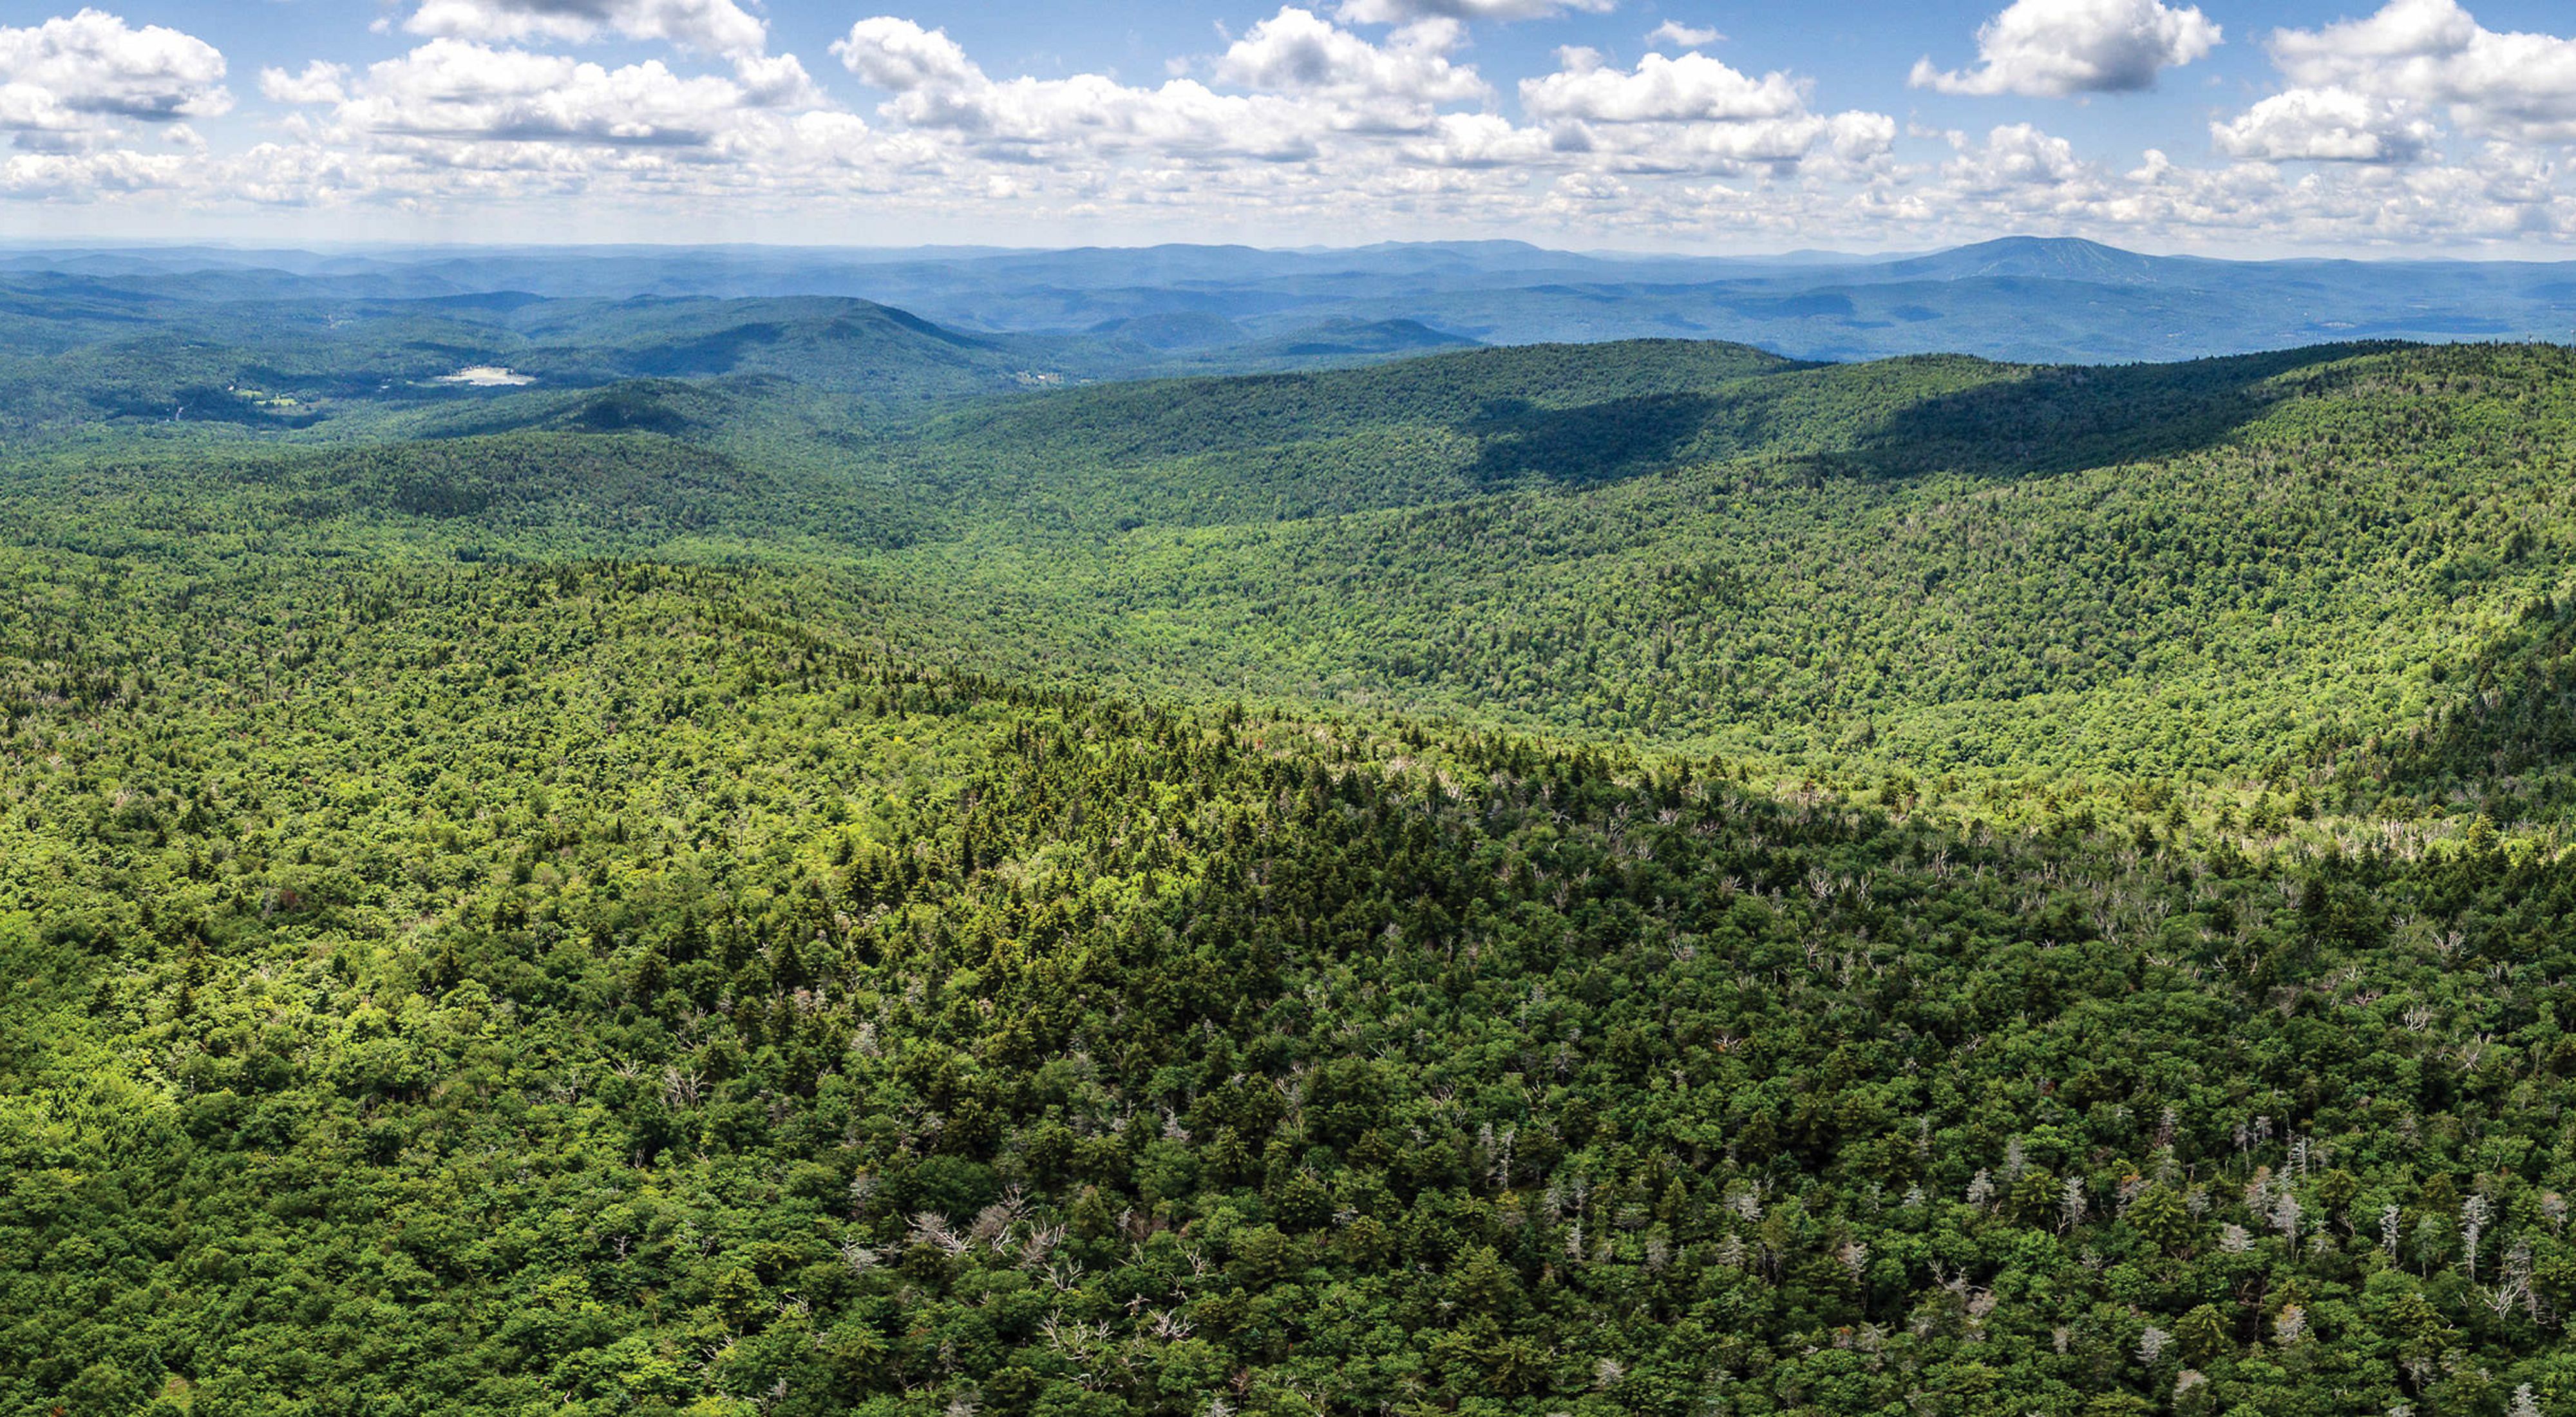 Landscape view of vast, rolling forested hills of the Glebe Mountain area in Vermont.